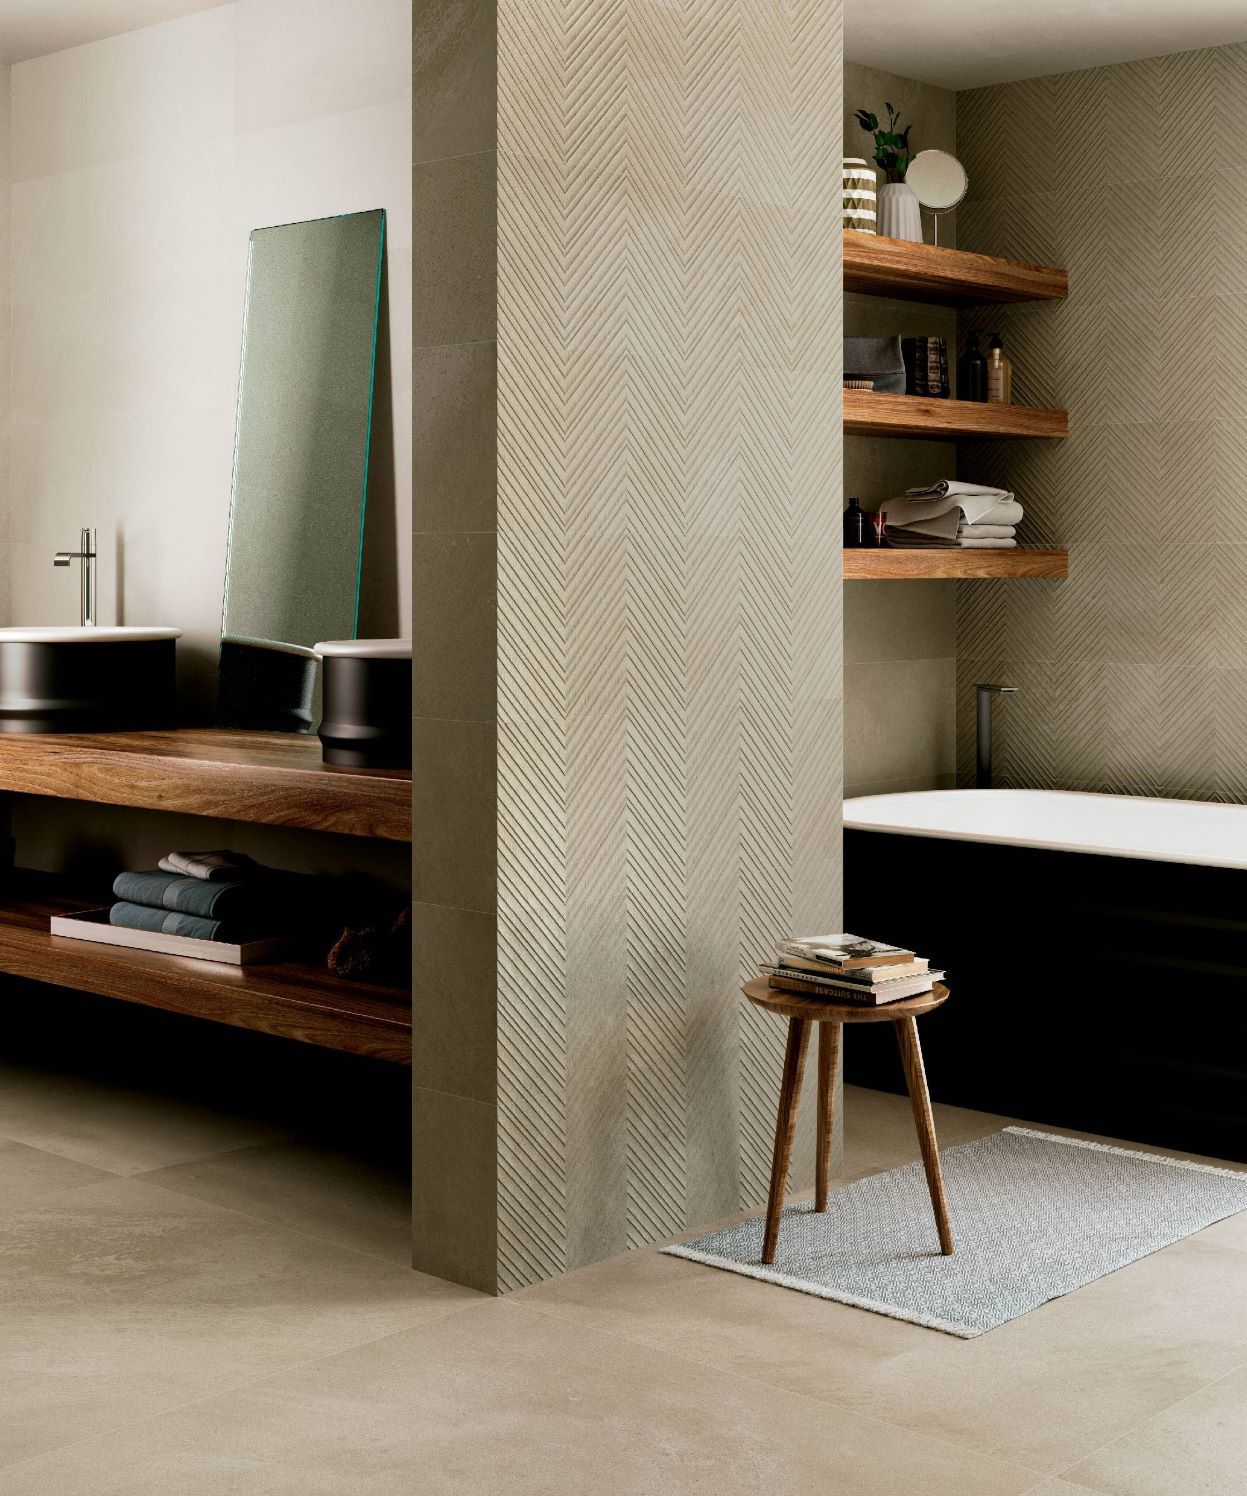 Tribeca_3_G | Stones & More | Finest selection of Mosaics, Glass, Tile and Stone